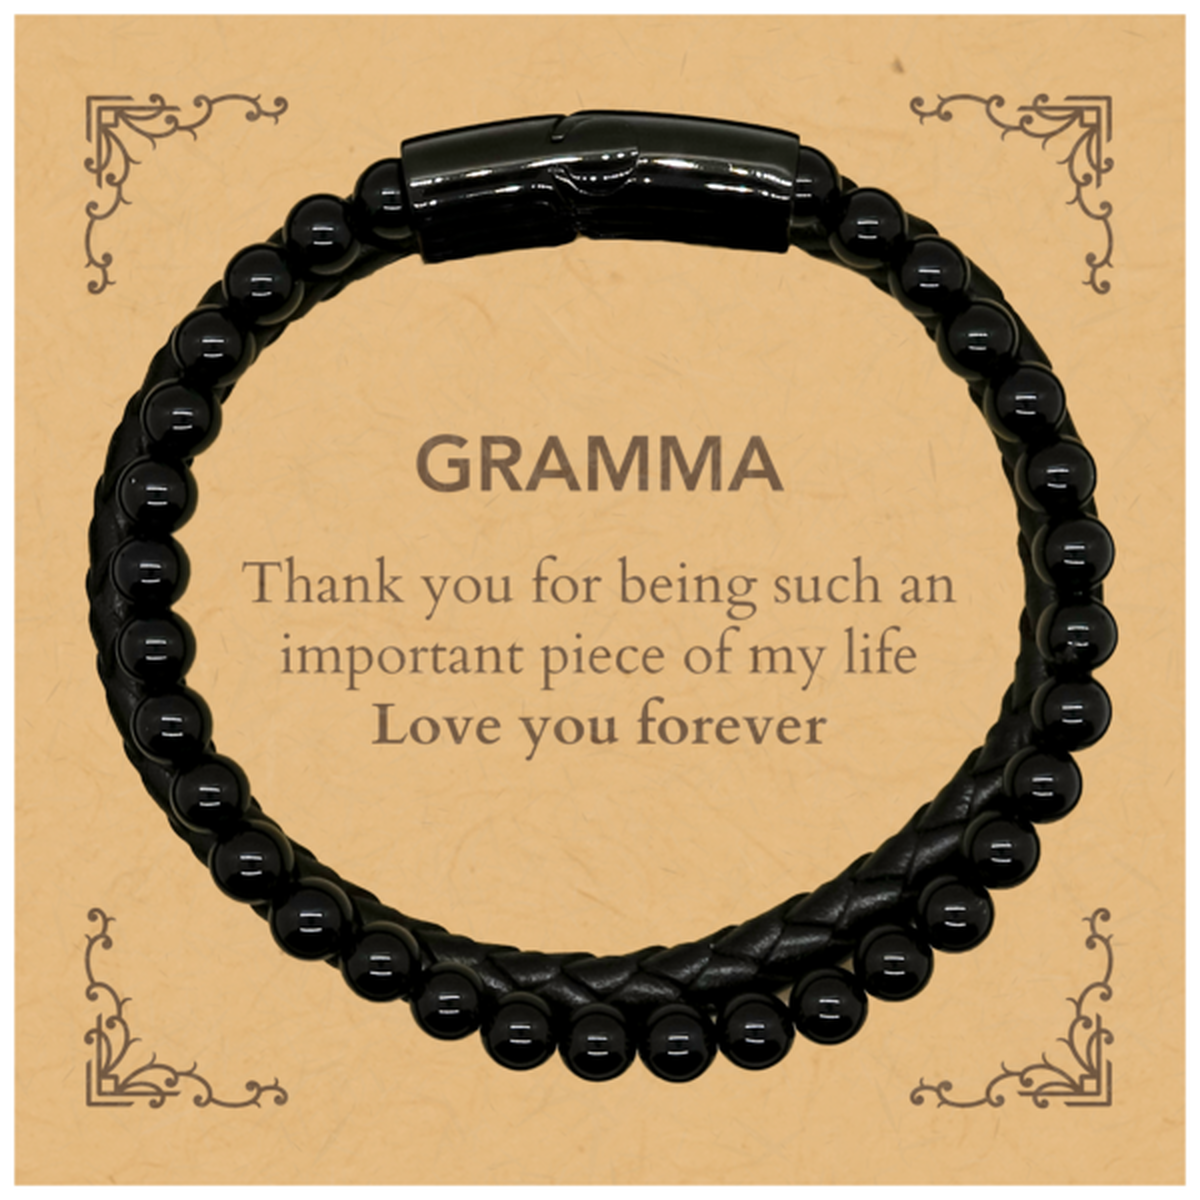 Appropriate Gramma Stone Leather Bracelets Epic Birthday Gifts for Gramma Thank you for being such an important piece of my life Gramma Christmas Mothers Fathers Day